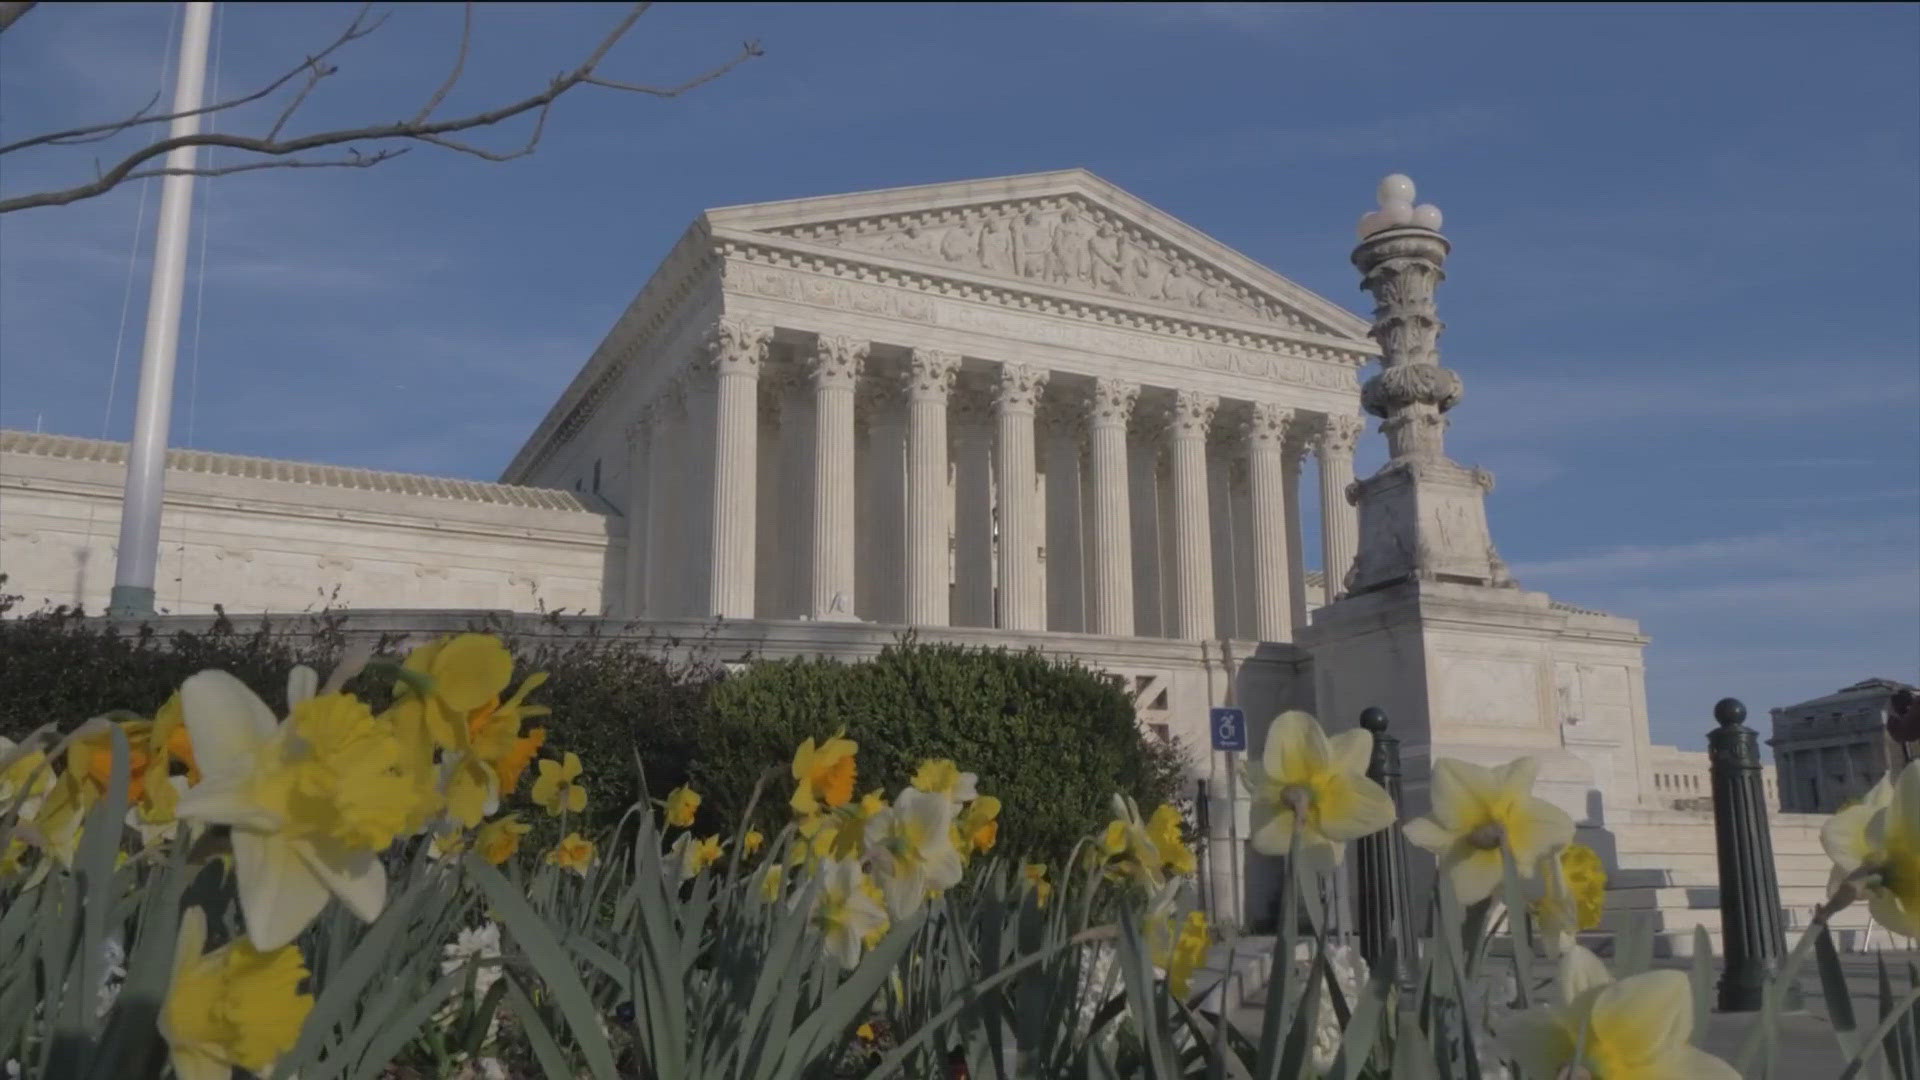 On April 24, the Supreme Court held arguments regarding Idaho's near abortion ban.